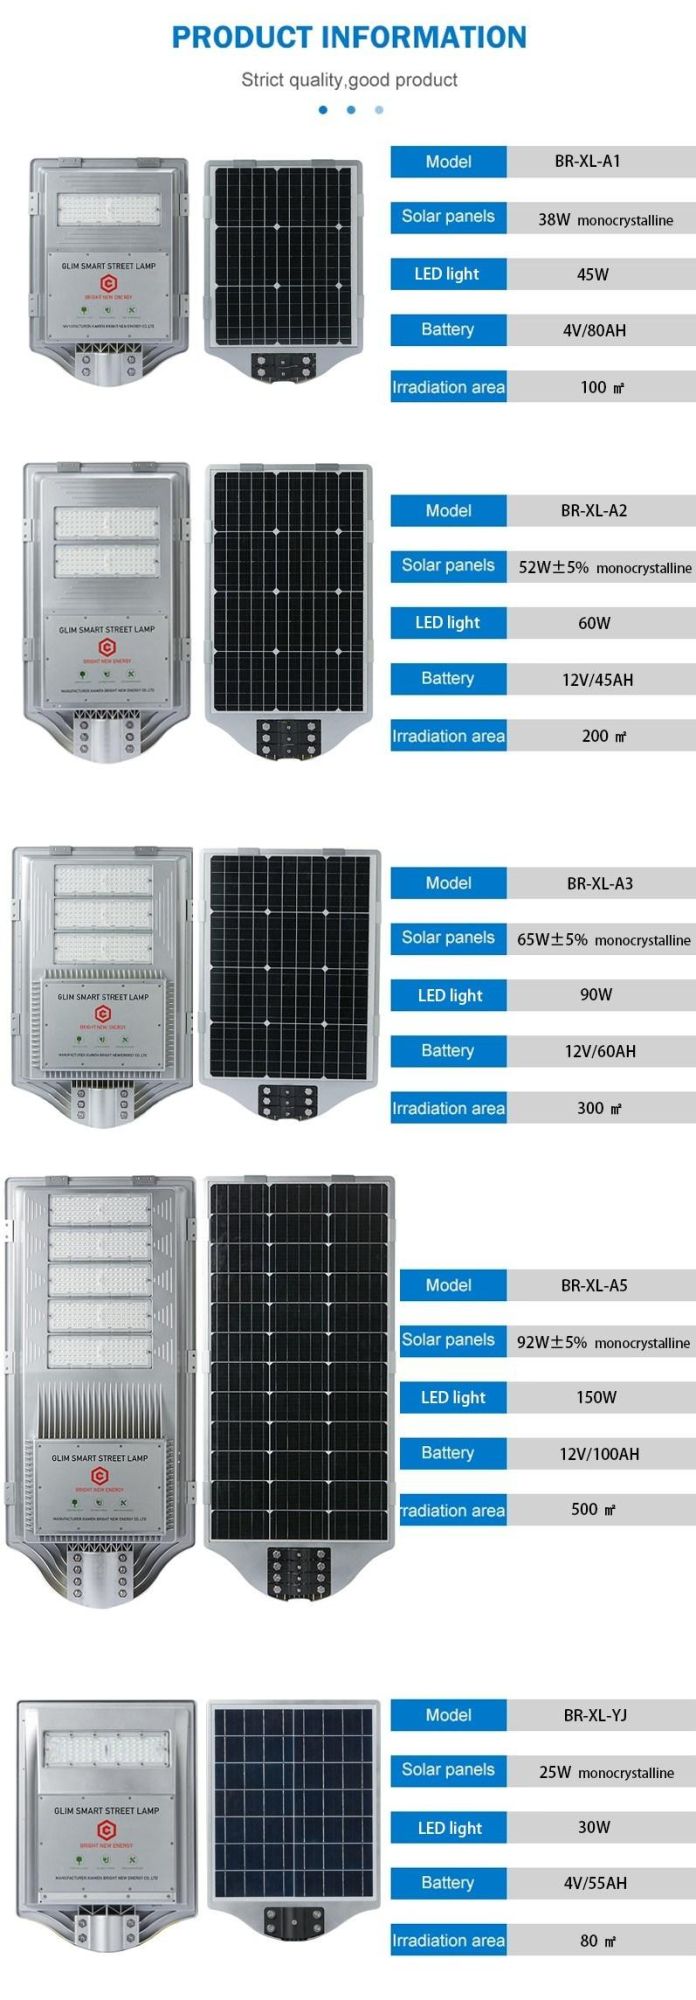 Factory New Products Waterproof Pathway 90W LED Outdoor Emergency Security Garden Solar Wall Lights Powered Saving Energy 90W 650W 800W 1000W Solar Light